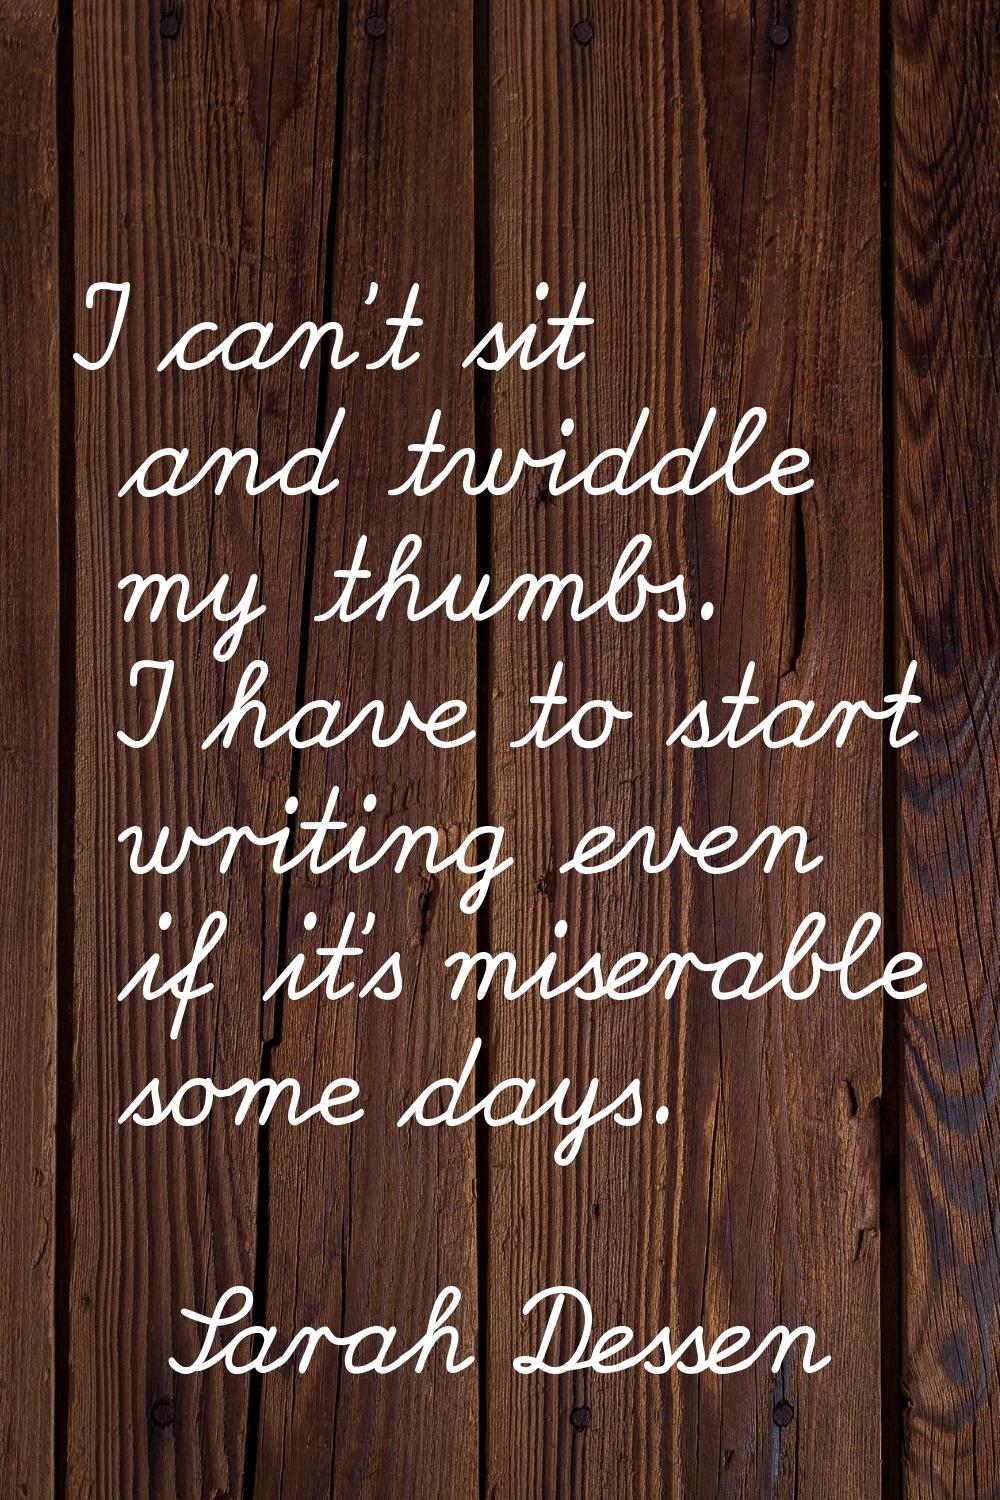 I can't sit and twiddle my thumbs. I have to start writing even if it's miserable some days.